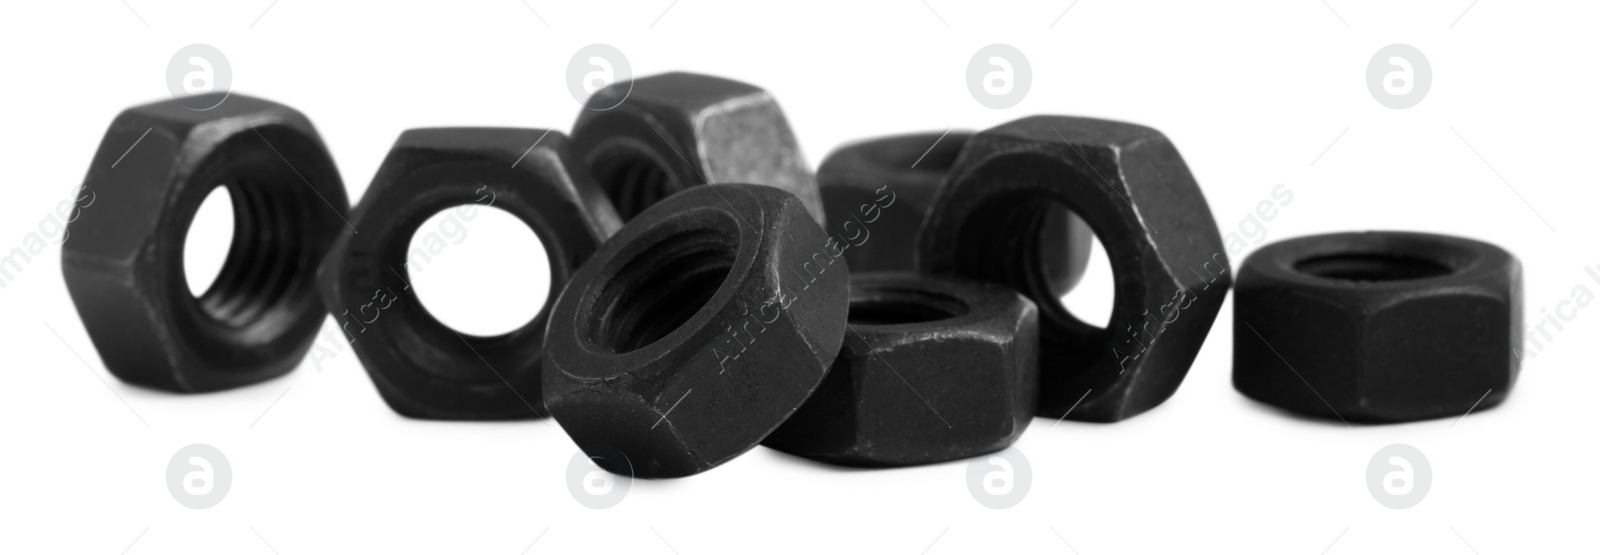 Photo of Many black metal hex nuts on white background